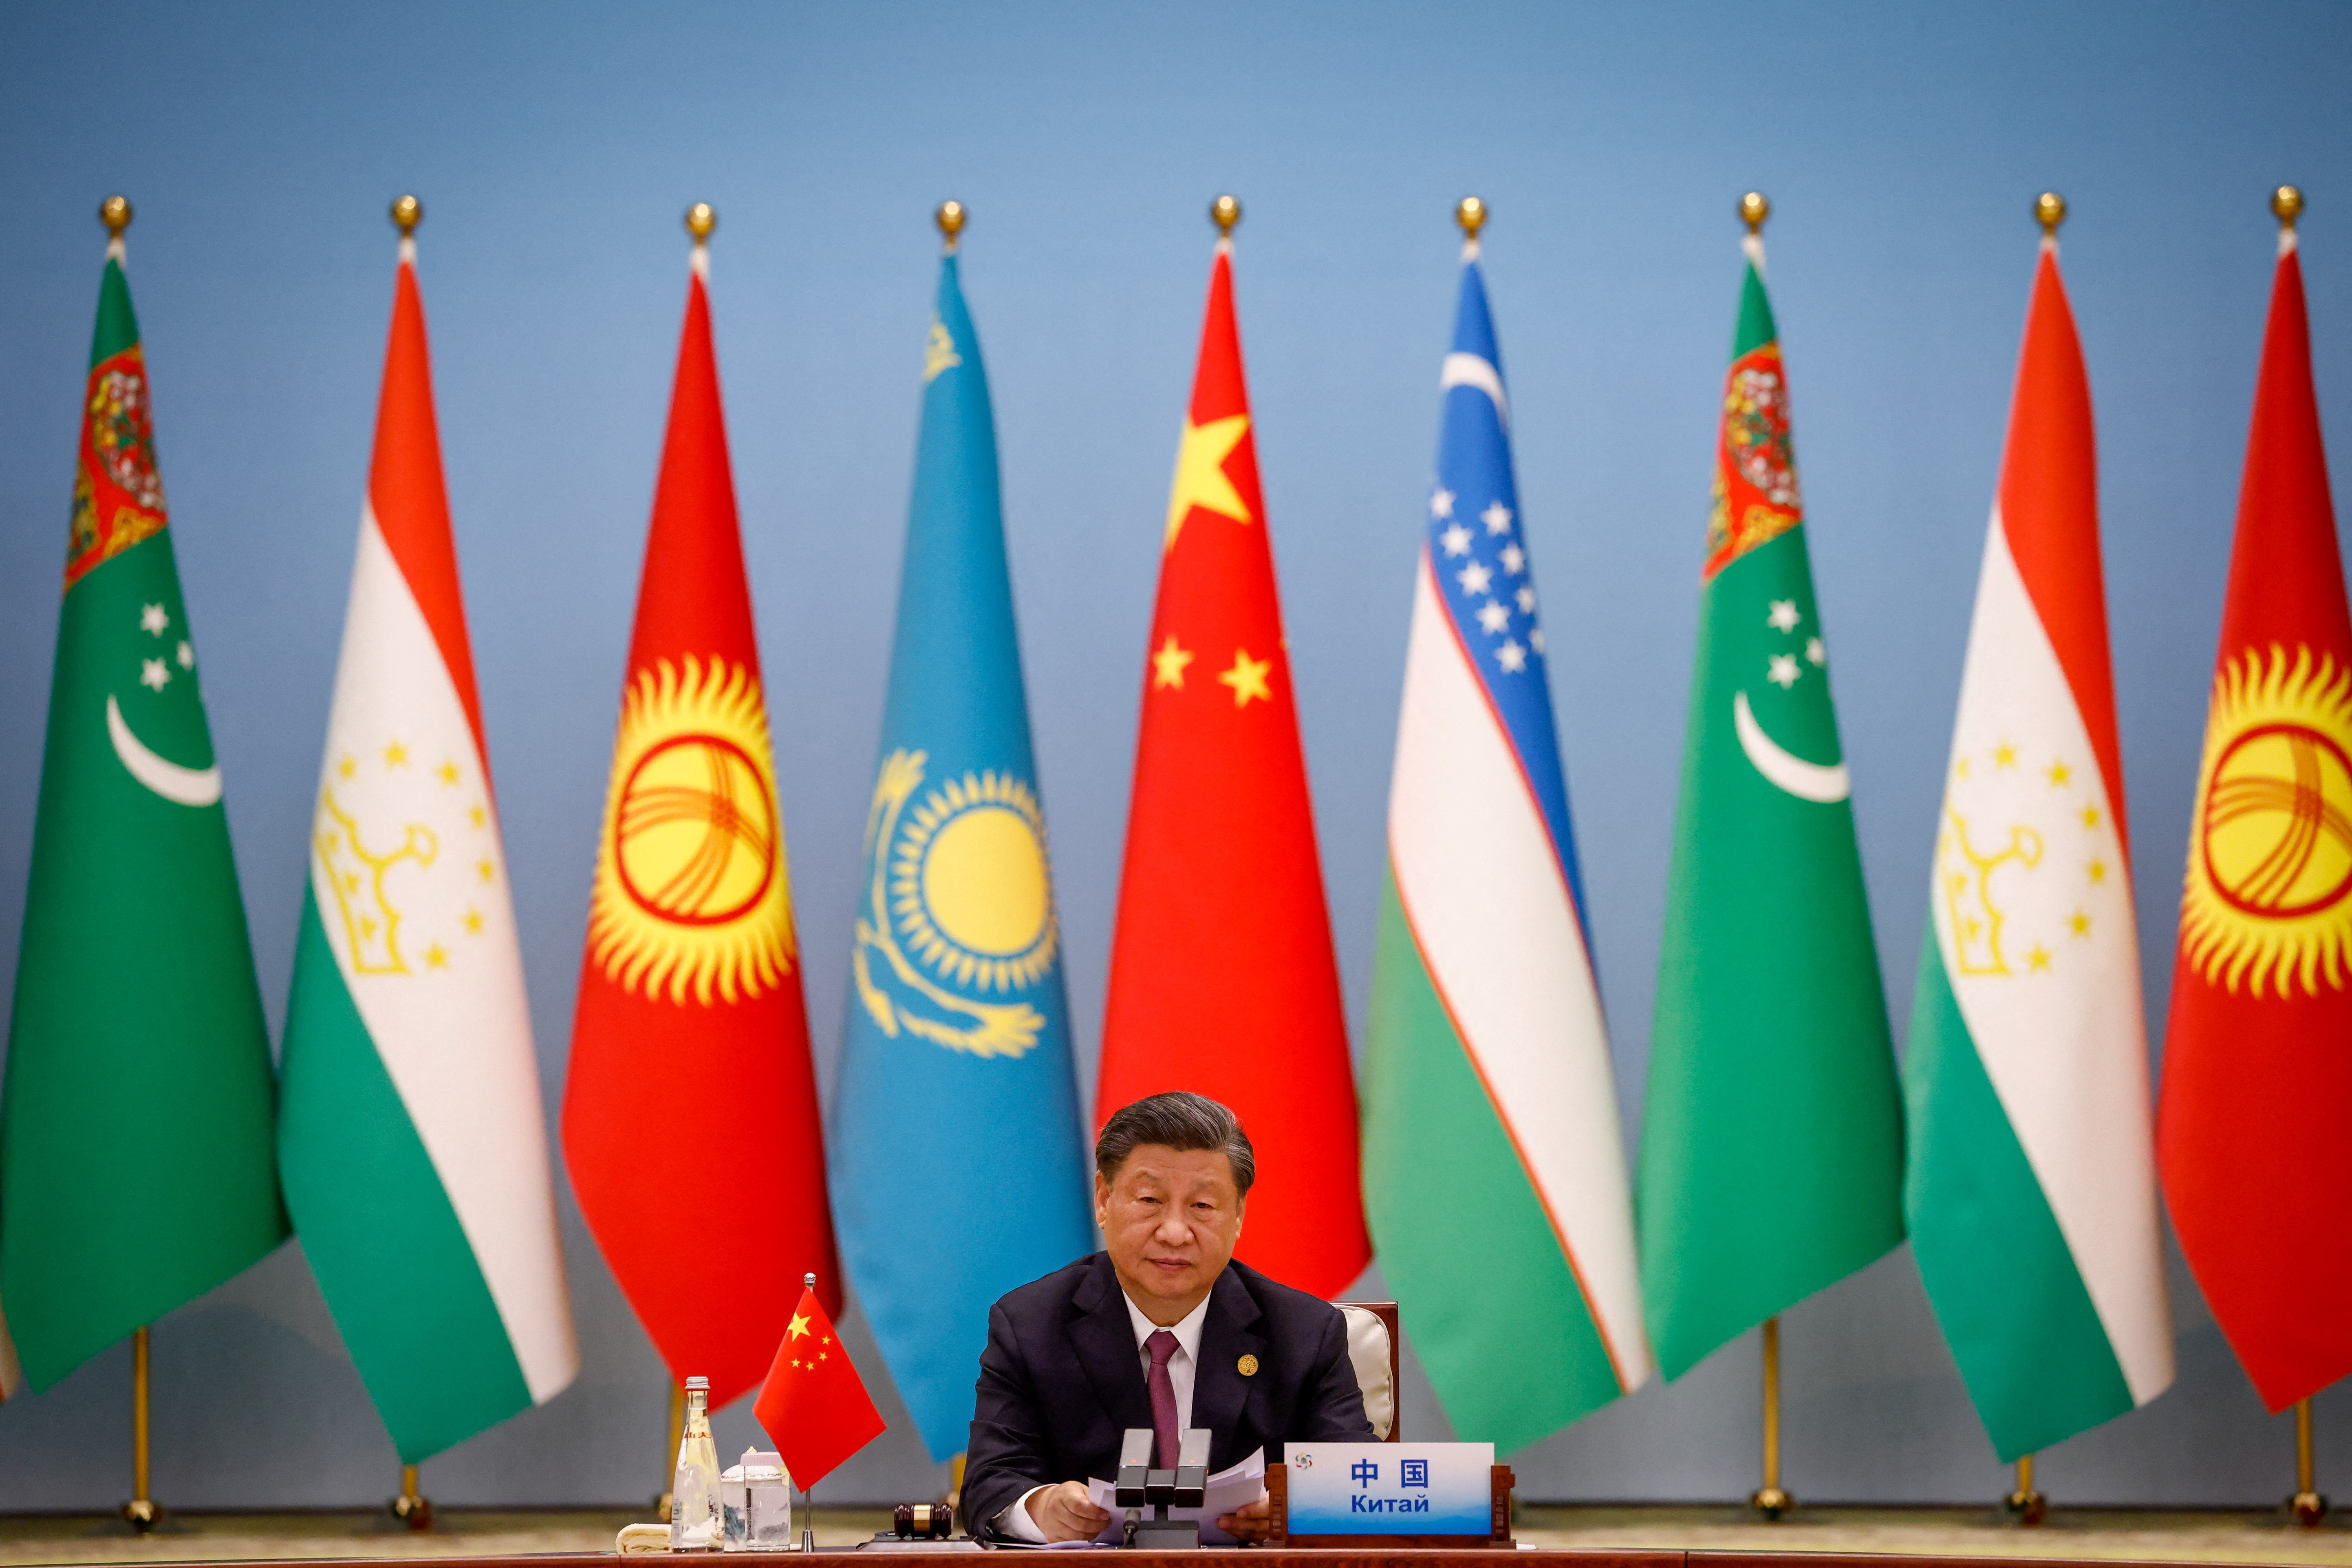 China-Central Asia Summit in Xian